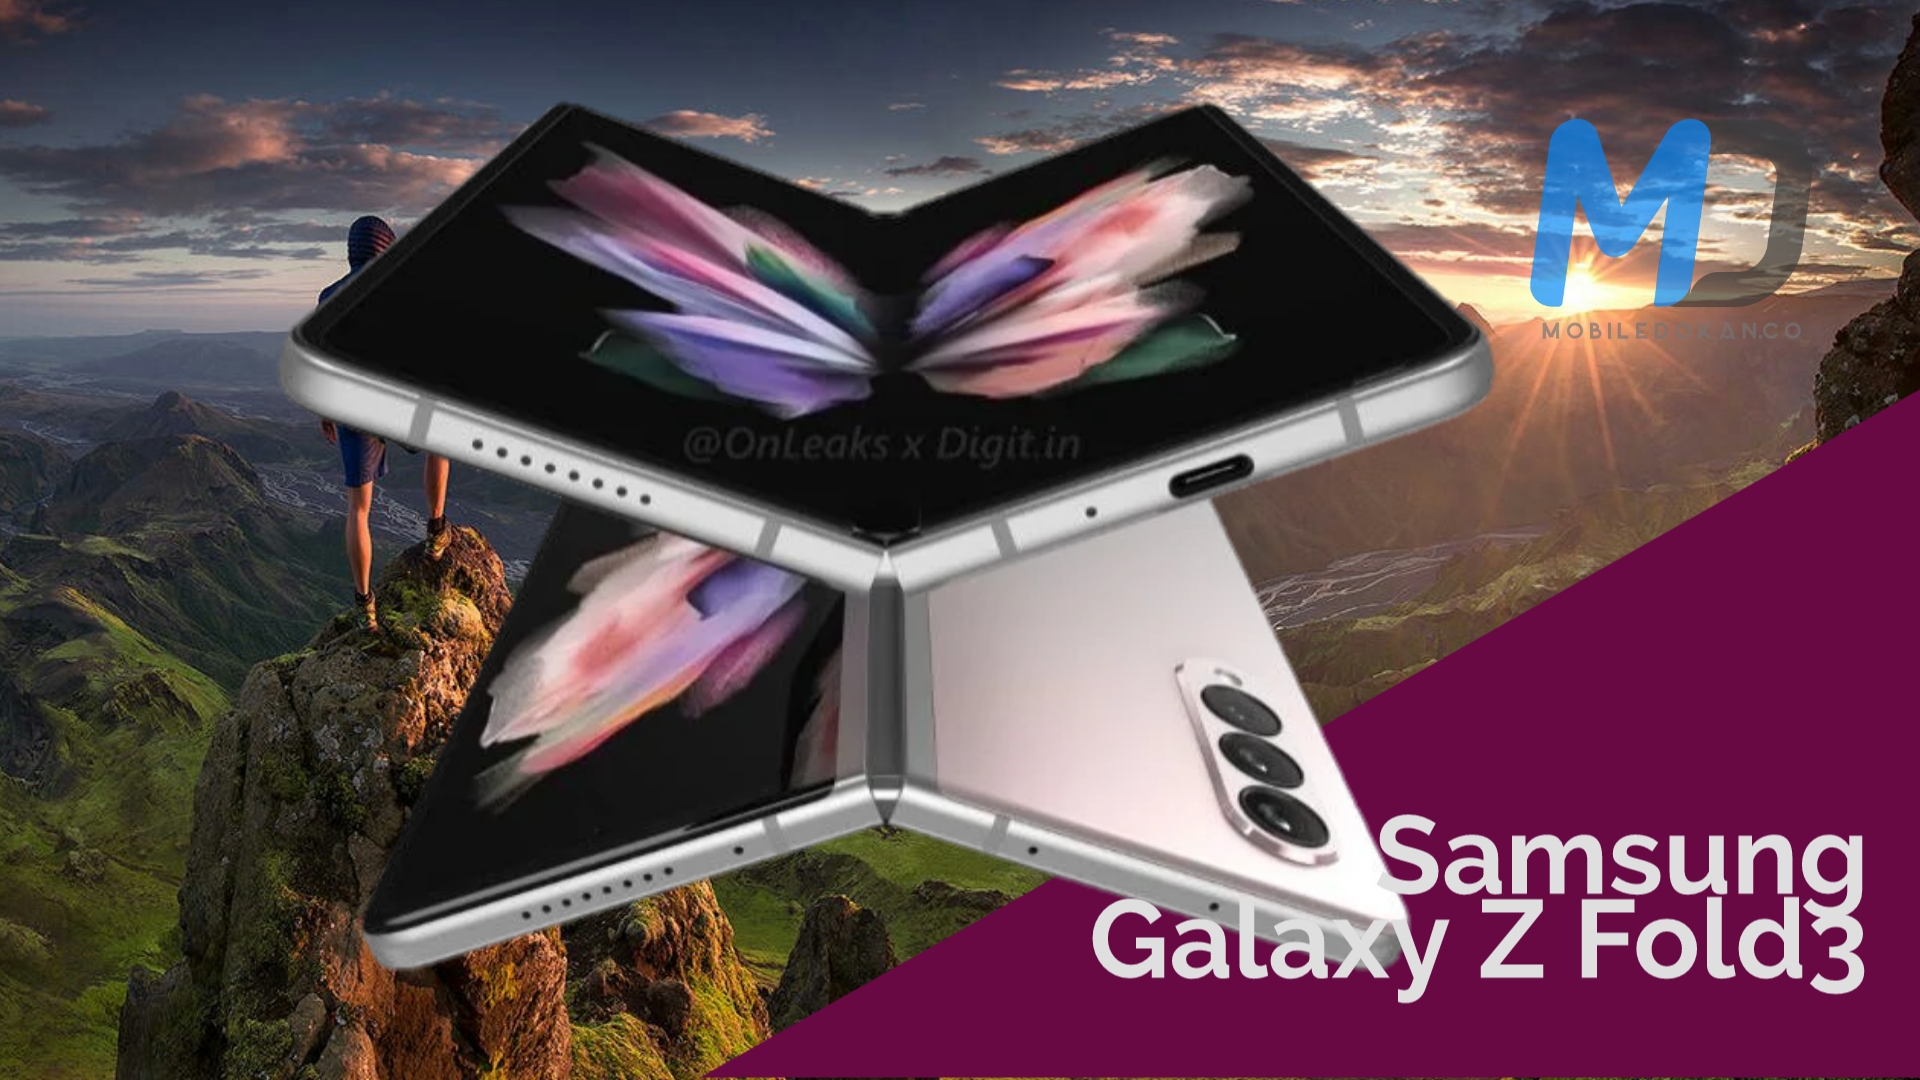 Samsung Galaxy Z Fold3 pricing specifications revealed ahead of launch